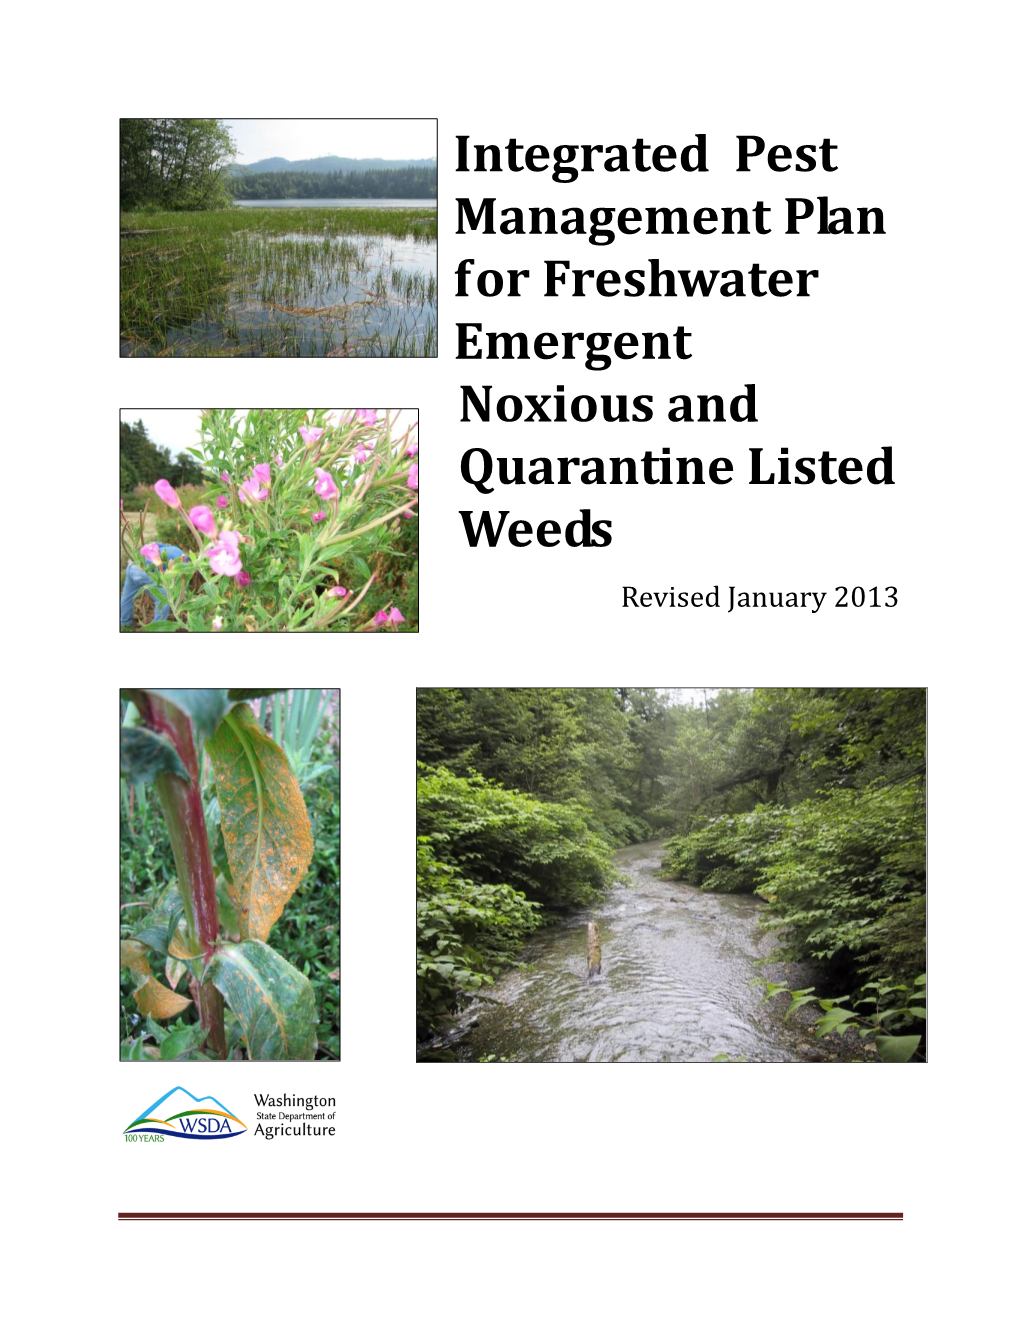 Integrated Pest Management Plan for Freshwater Emergent Noxious and Quarantine Listed Weeds Revised January 2013